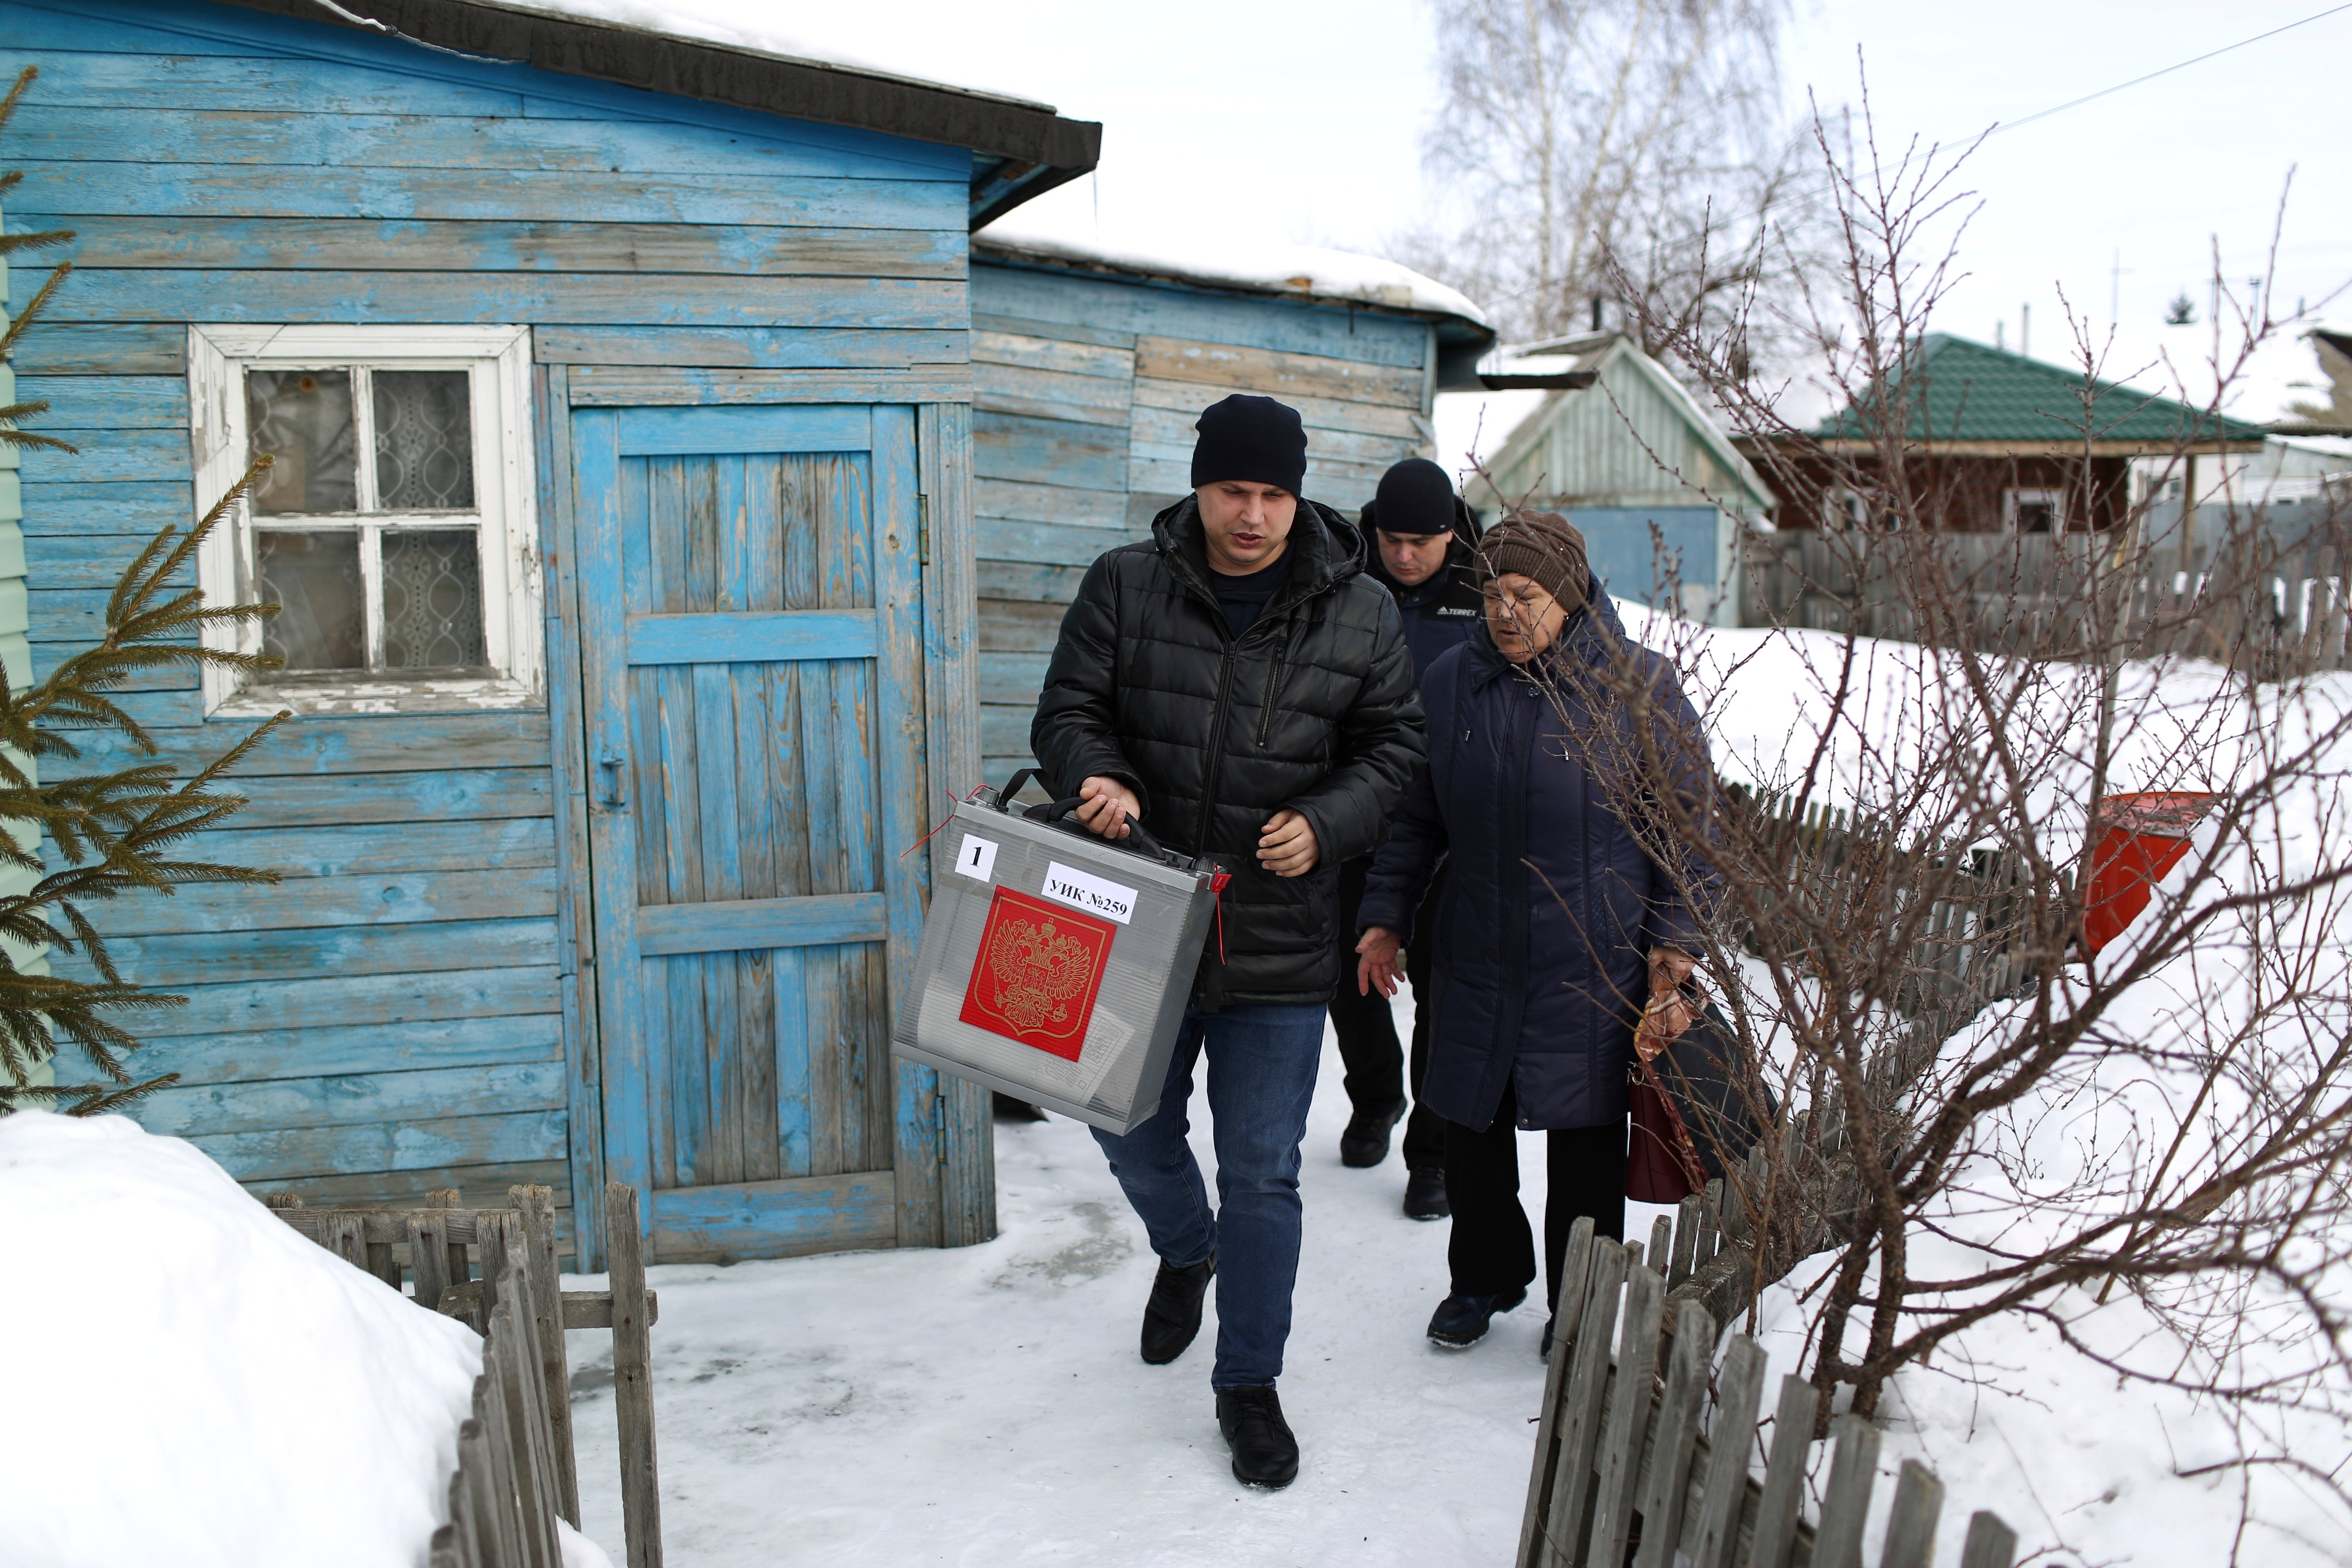 A mobile voting unit on Saturday in the village of Nikolayevka, near the Siberian city of Omsk